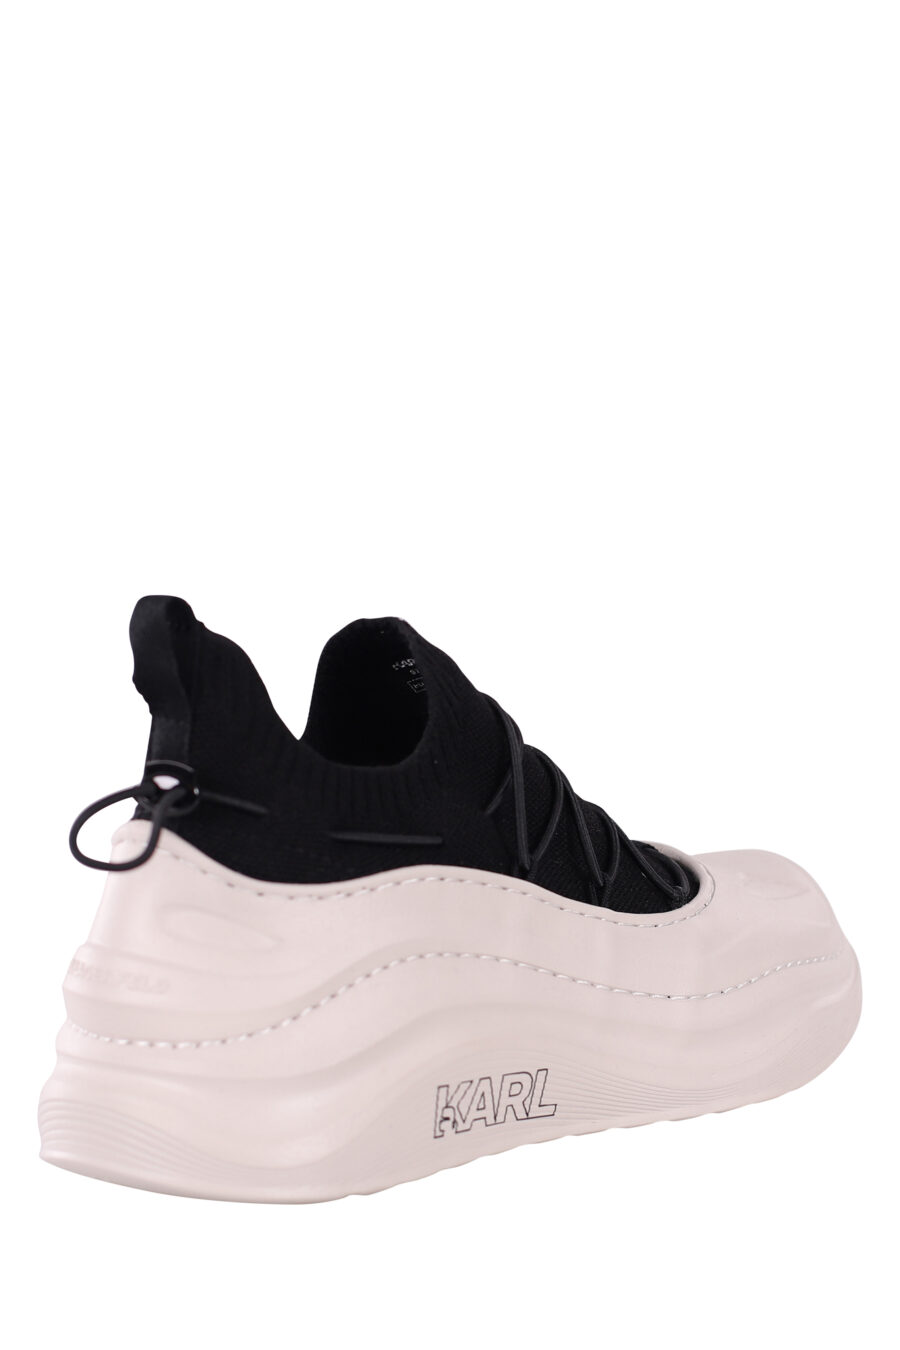 Black and white bicolour trainers with wavy white sole - IMG 5876